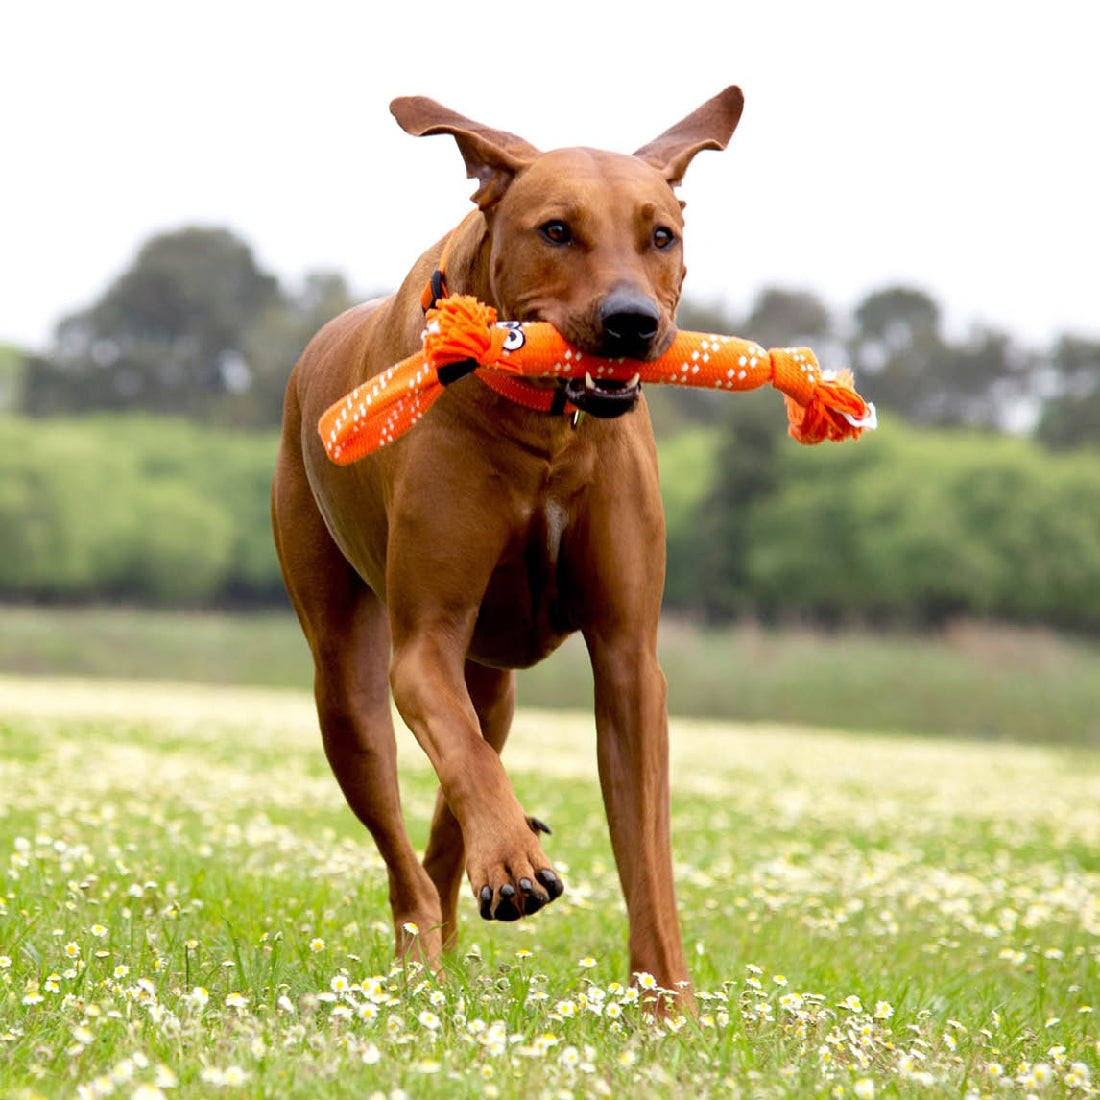 Dog with orange Rogz toy in mouth running through field.